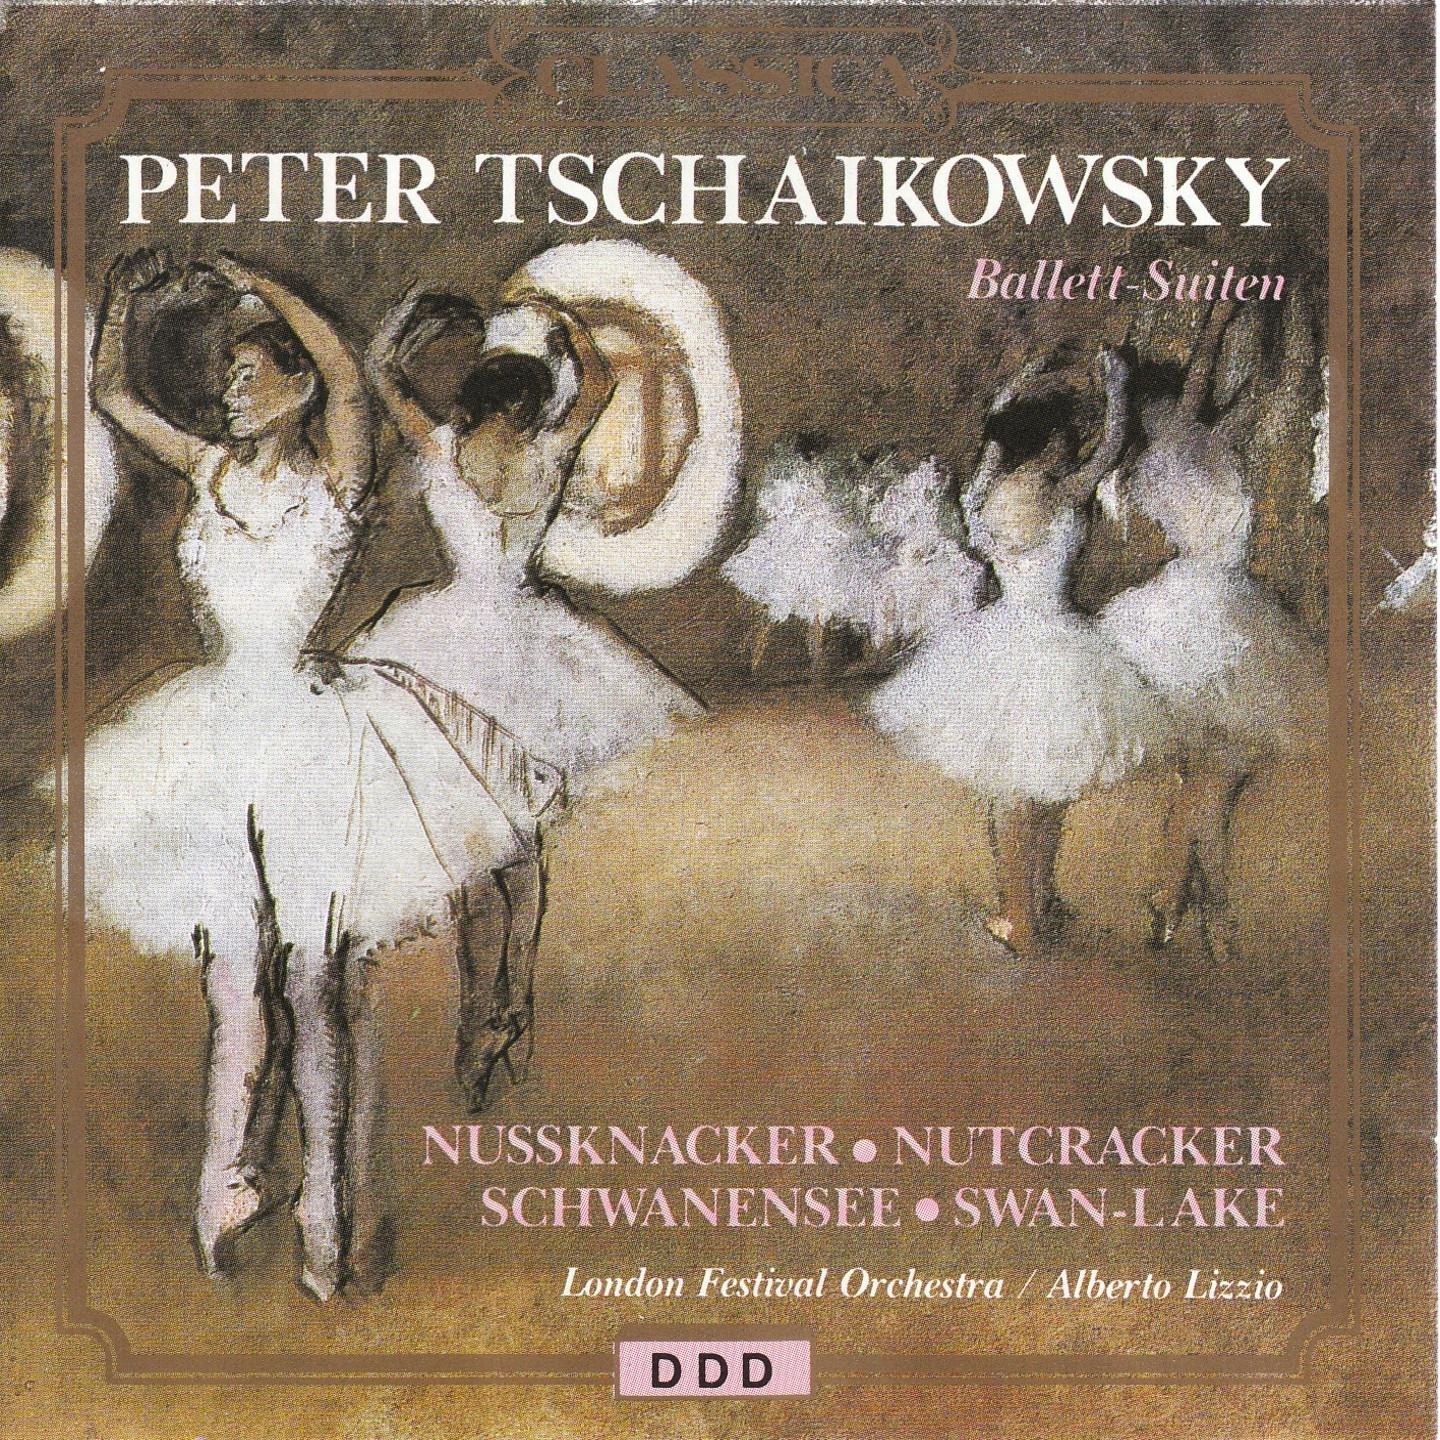 Suite from Swan Lake, Op. 20a, TH 219: I. Sce ne No. 2